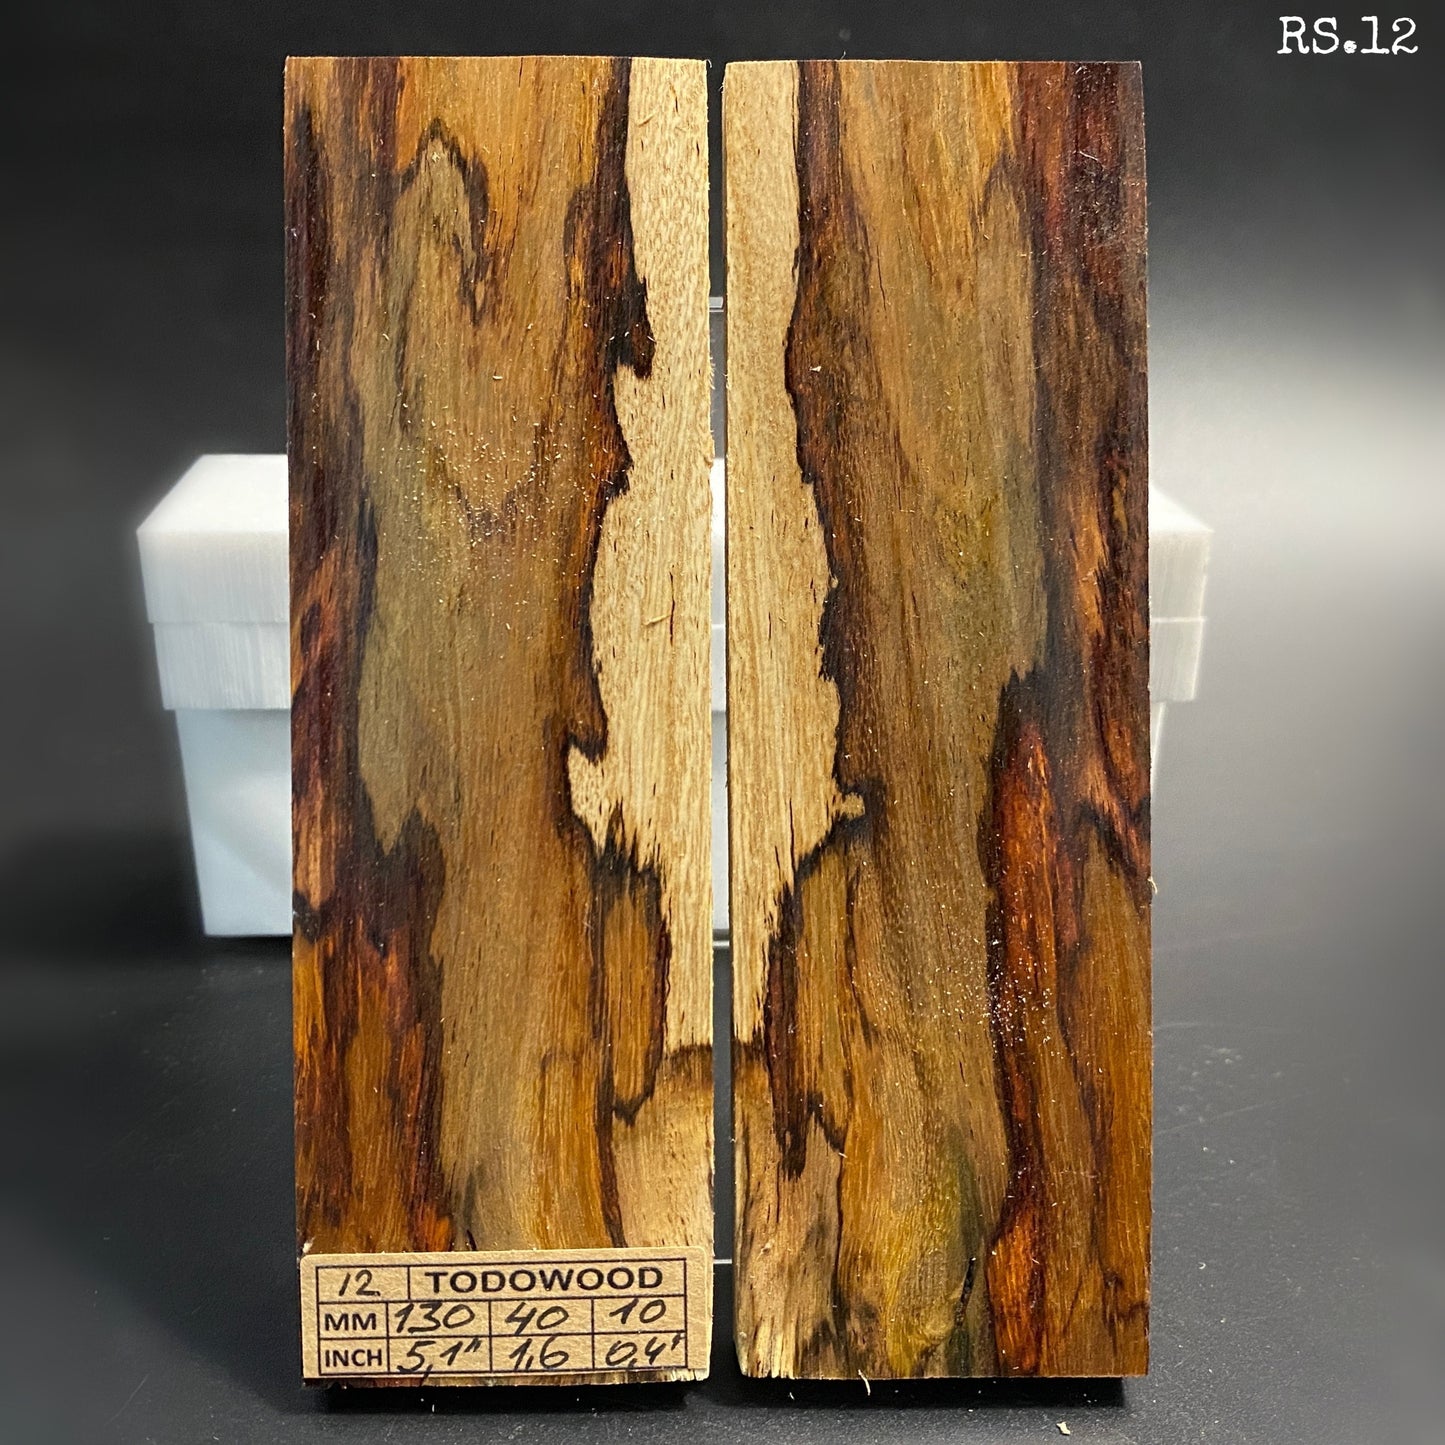 ROSEWOOD SPALTED, Mirror Blanks for Crafting, Woodworking, Precious Woods. France Stock. #RS.12